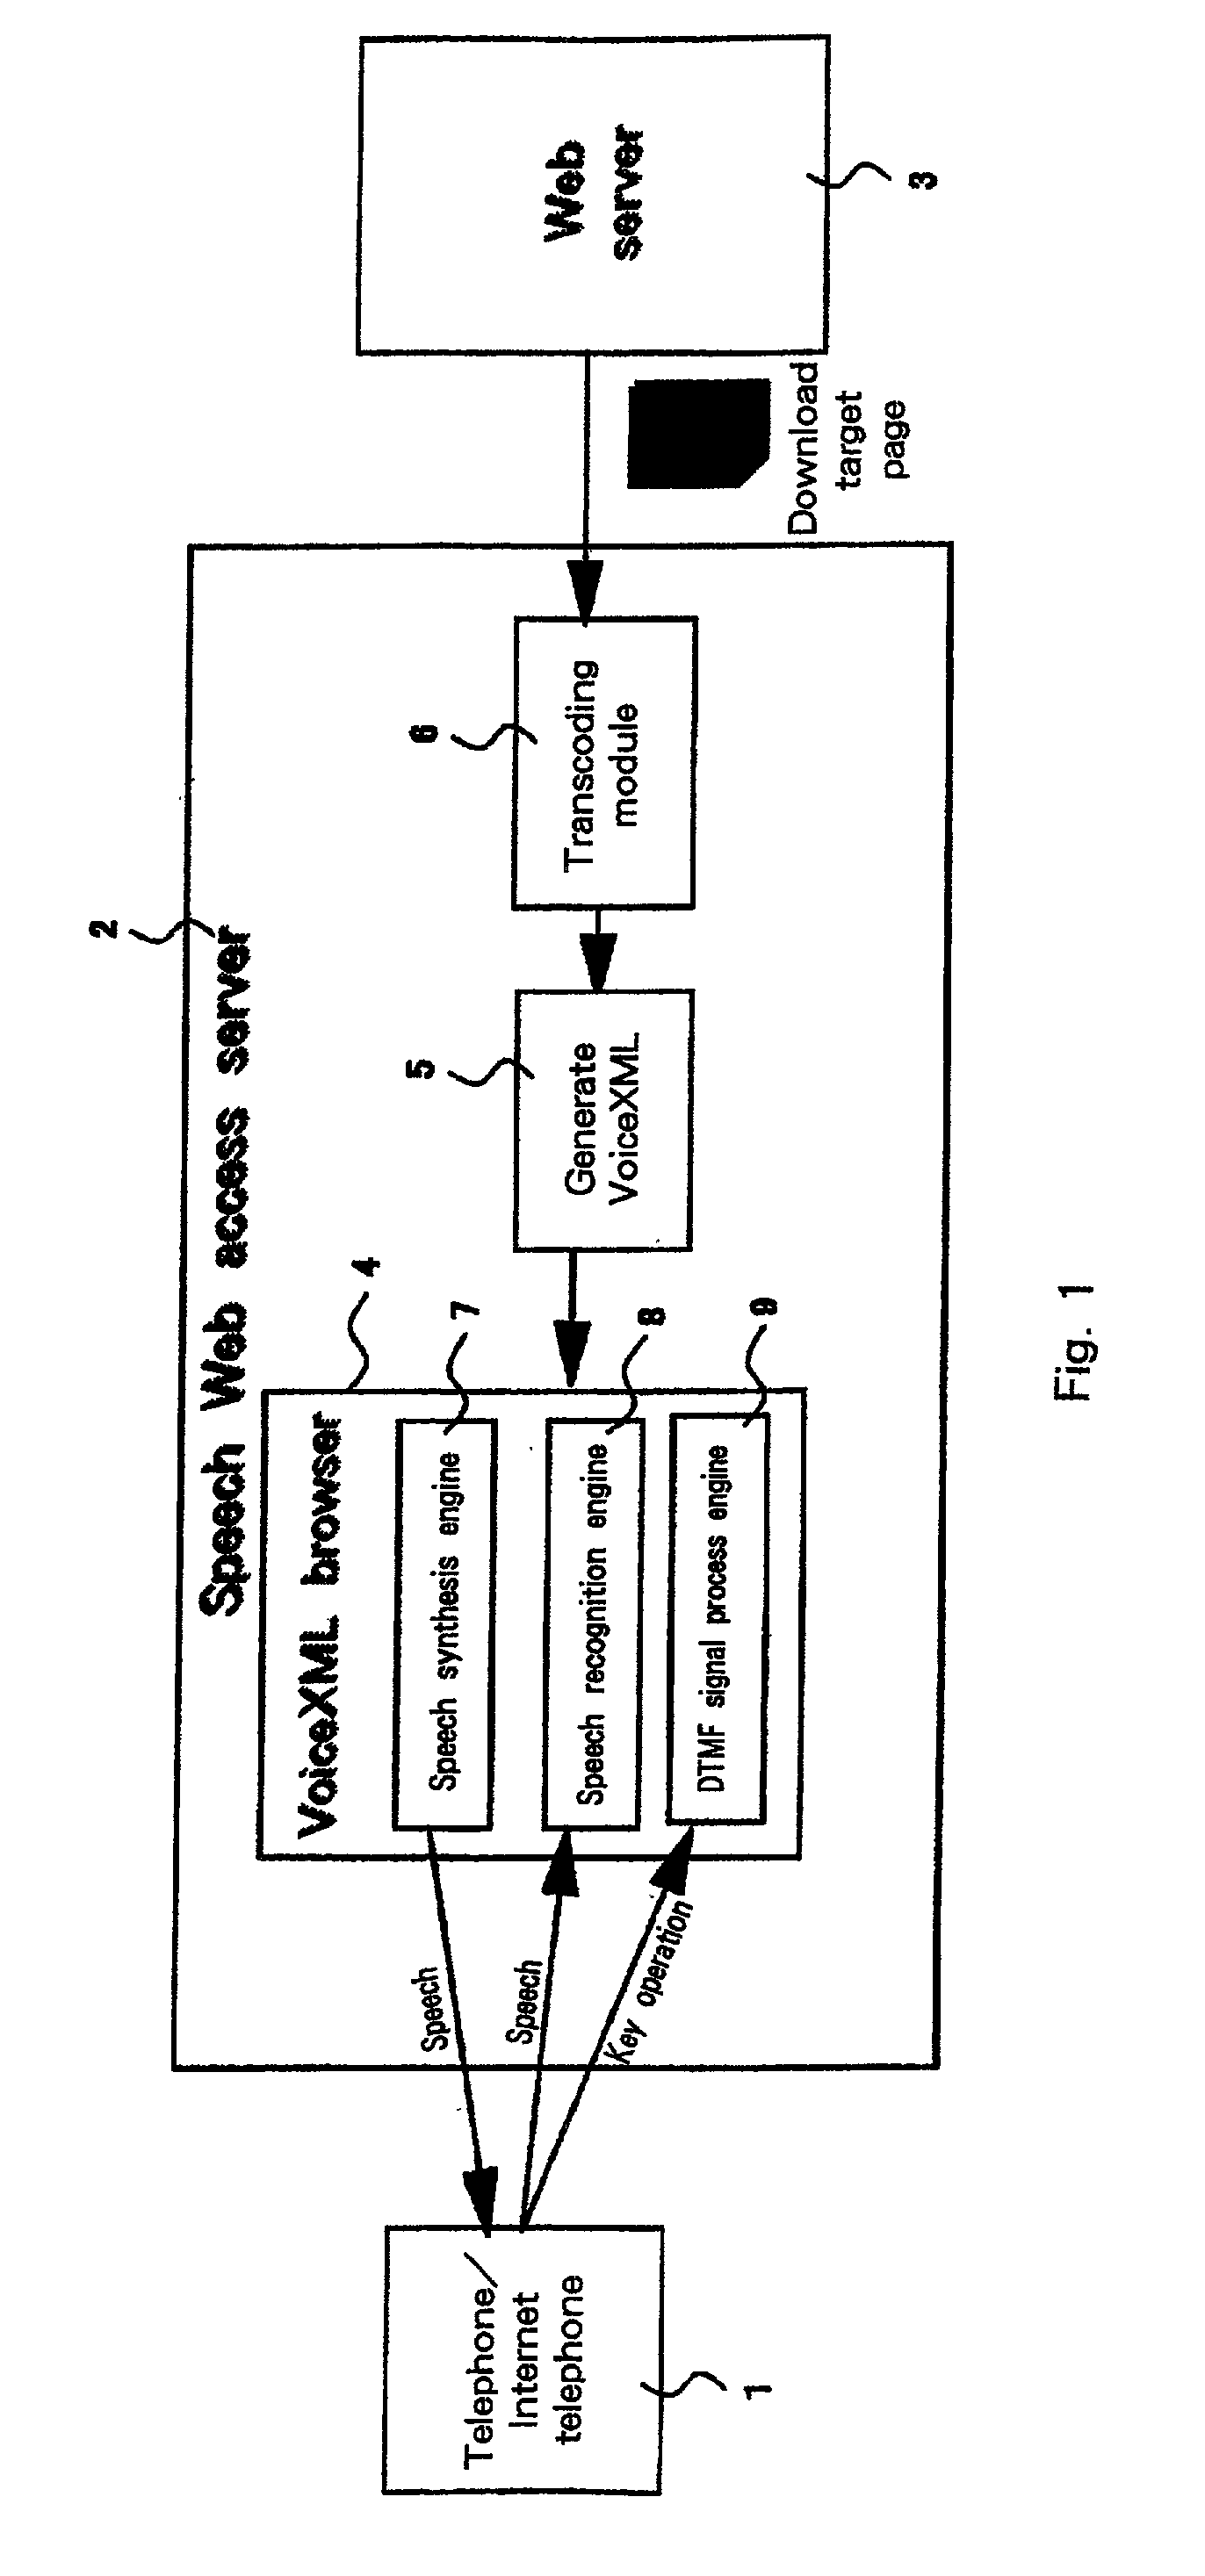 System and method for information access